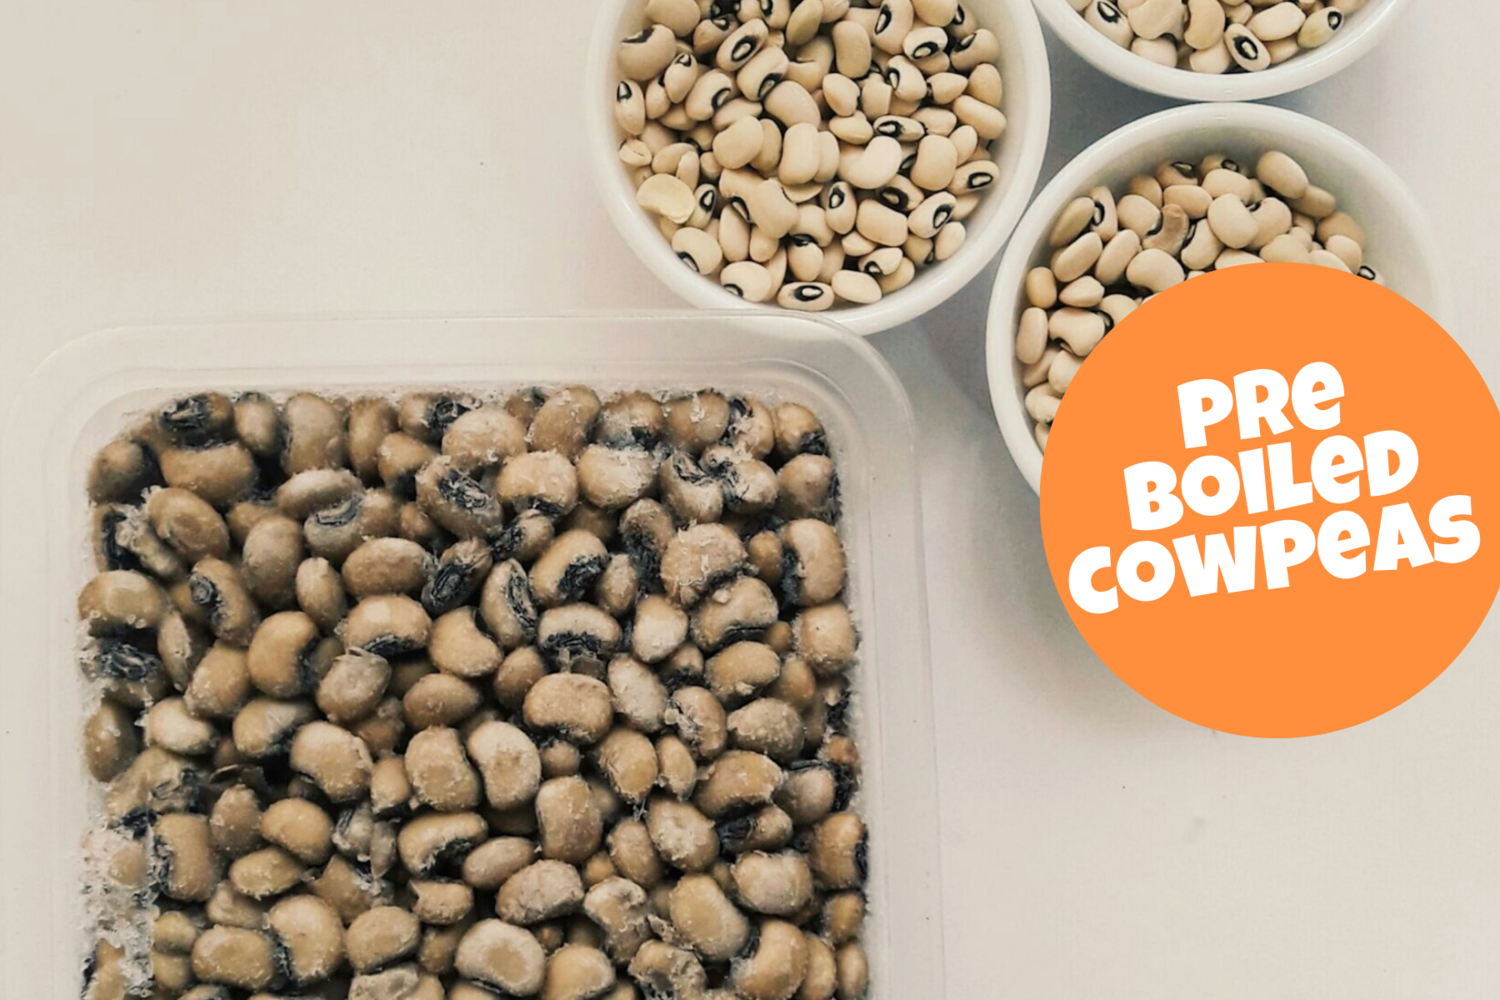 Pre Boiled Cow peas a.k.a black eyed peas a.k.a kunde 500g pack